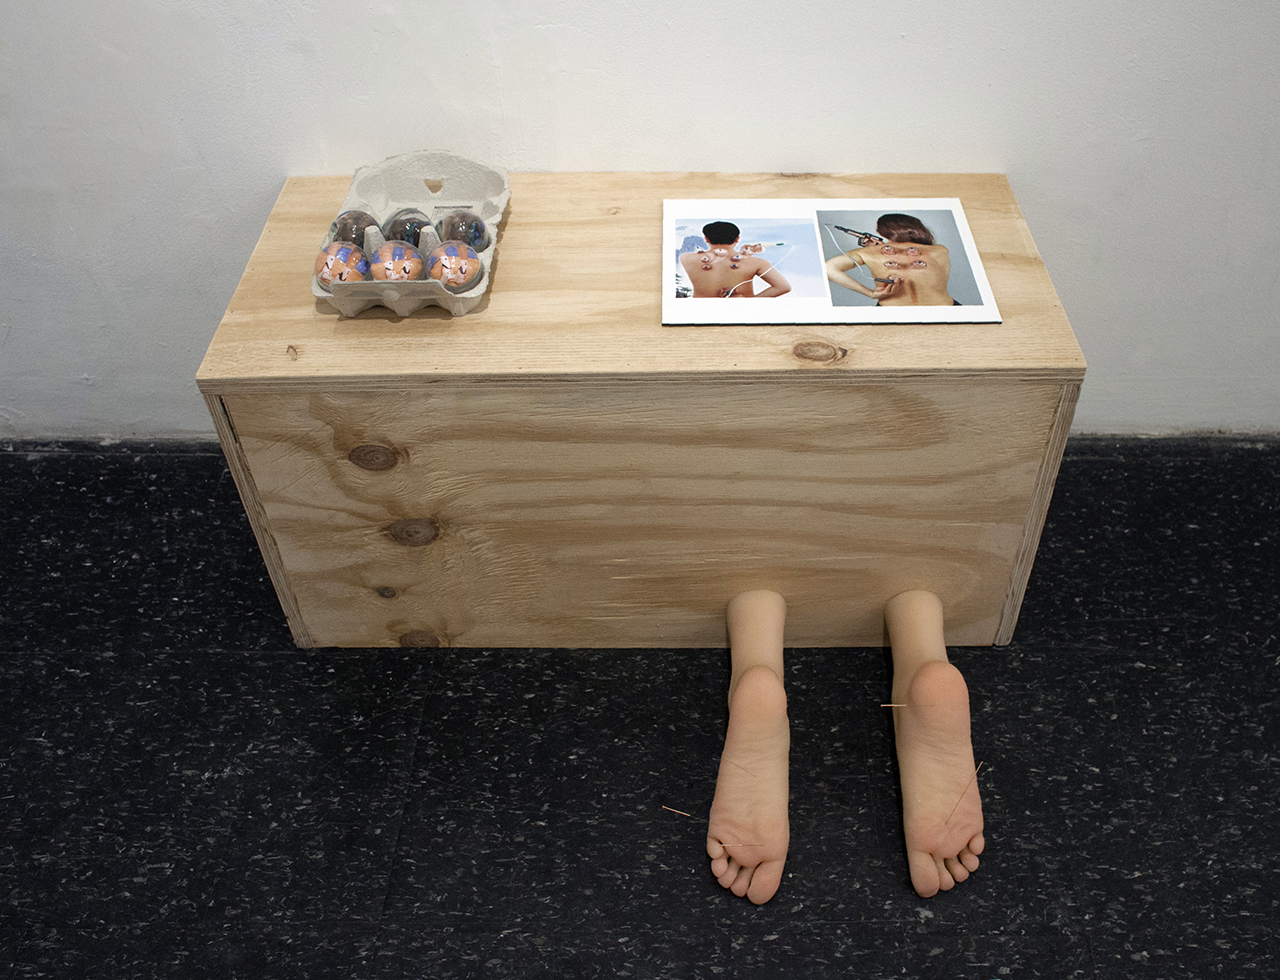 Maryam Jafri. Depression (2017). 29.5" x 14.5" x 24.25". wood, silicone feet, acupuncture needles, glass cupping equipment, photograph, paper, egg carton